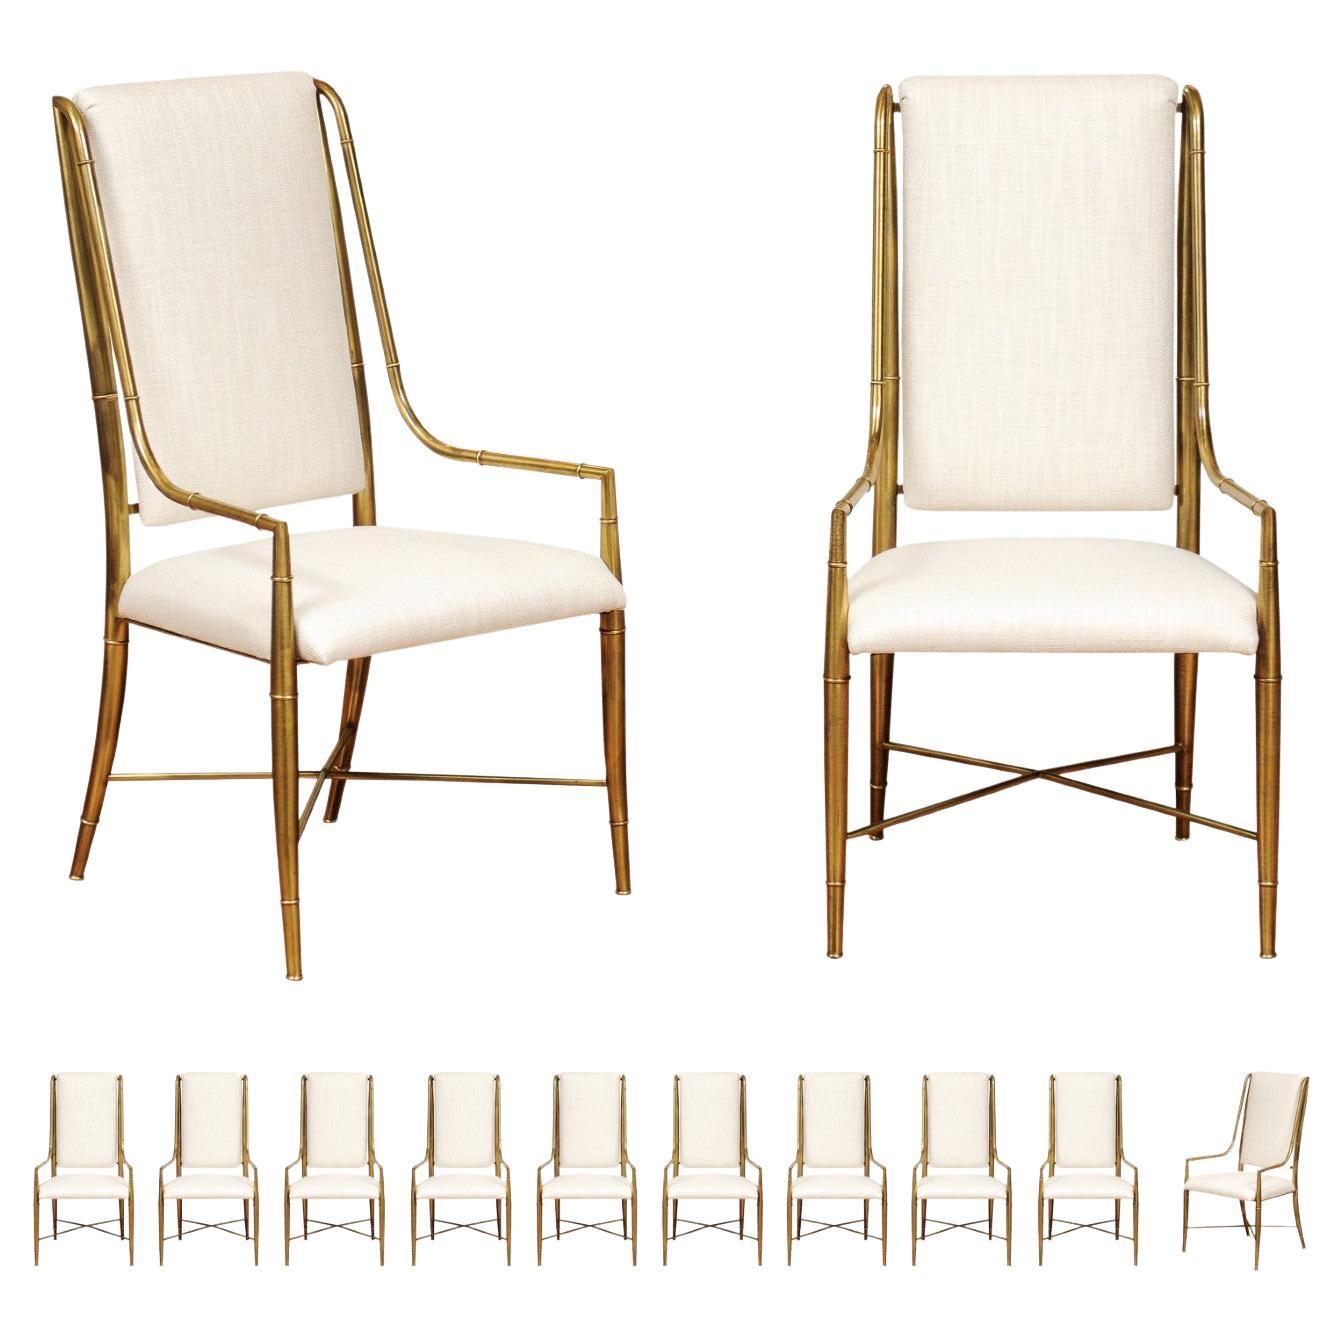 Magnificent Set of 12 Dining Brass Chairs by Weiman/Warren Lloyd for Mastercraft For Sale